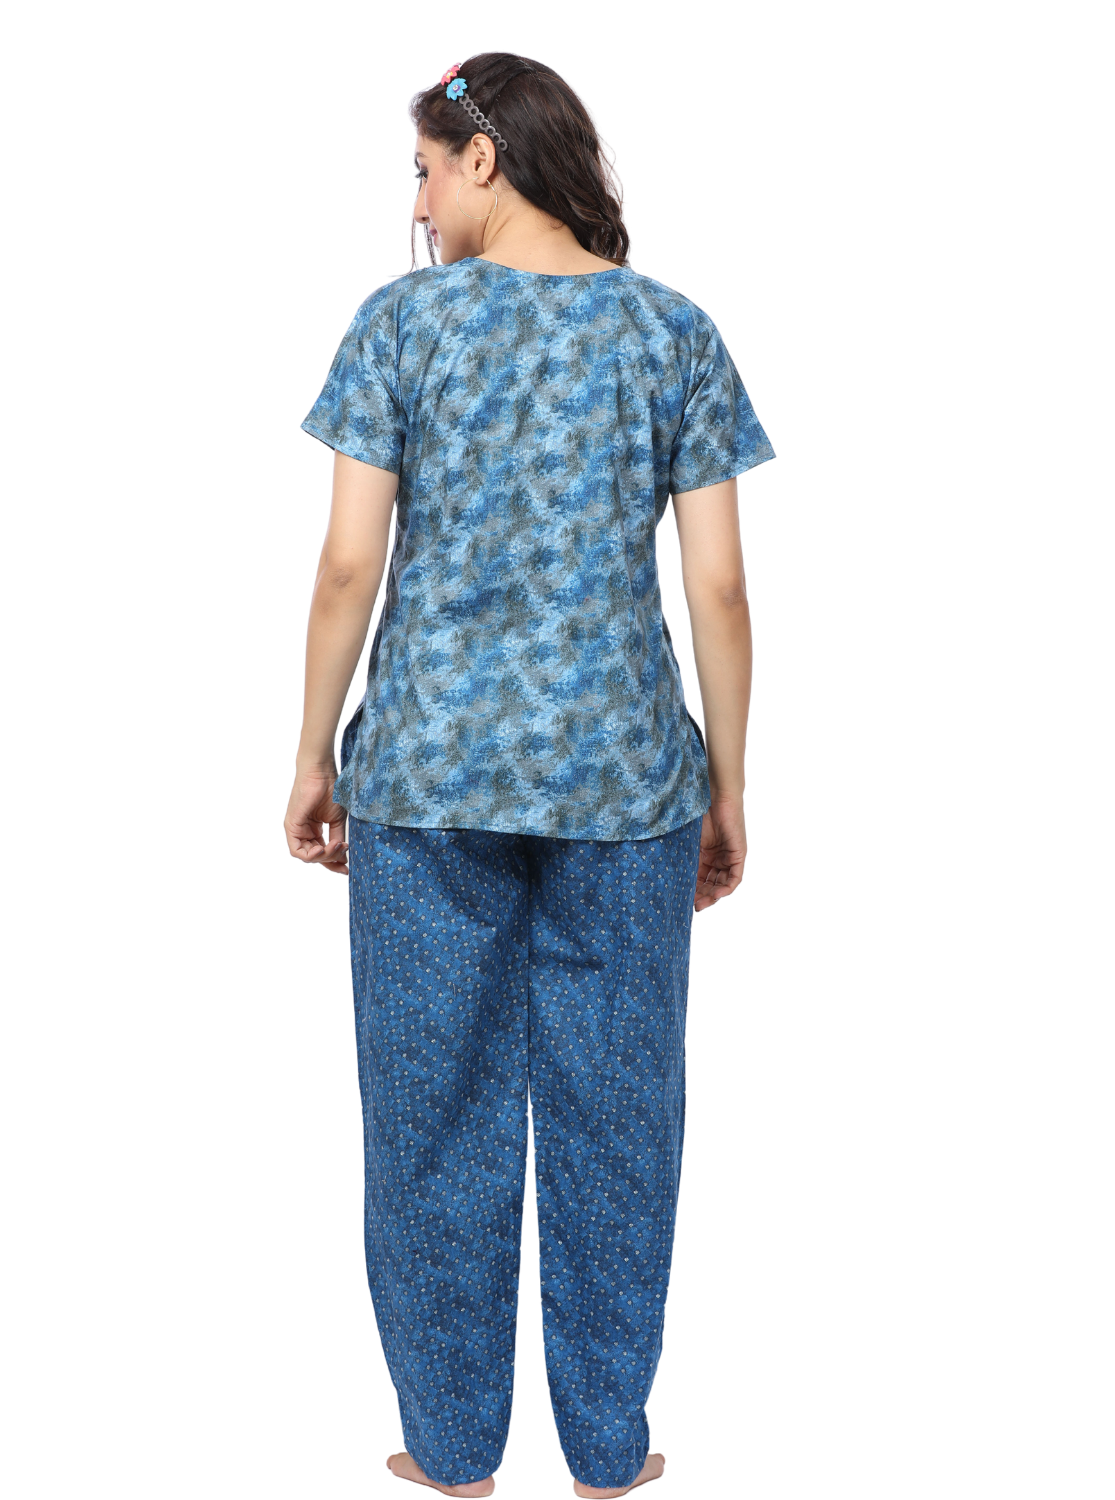 ONLY MINE Summer New Arrival Premium Cotton Night Suits - Latest Collection's Top & Bottom Set